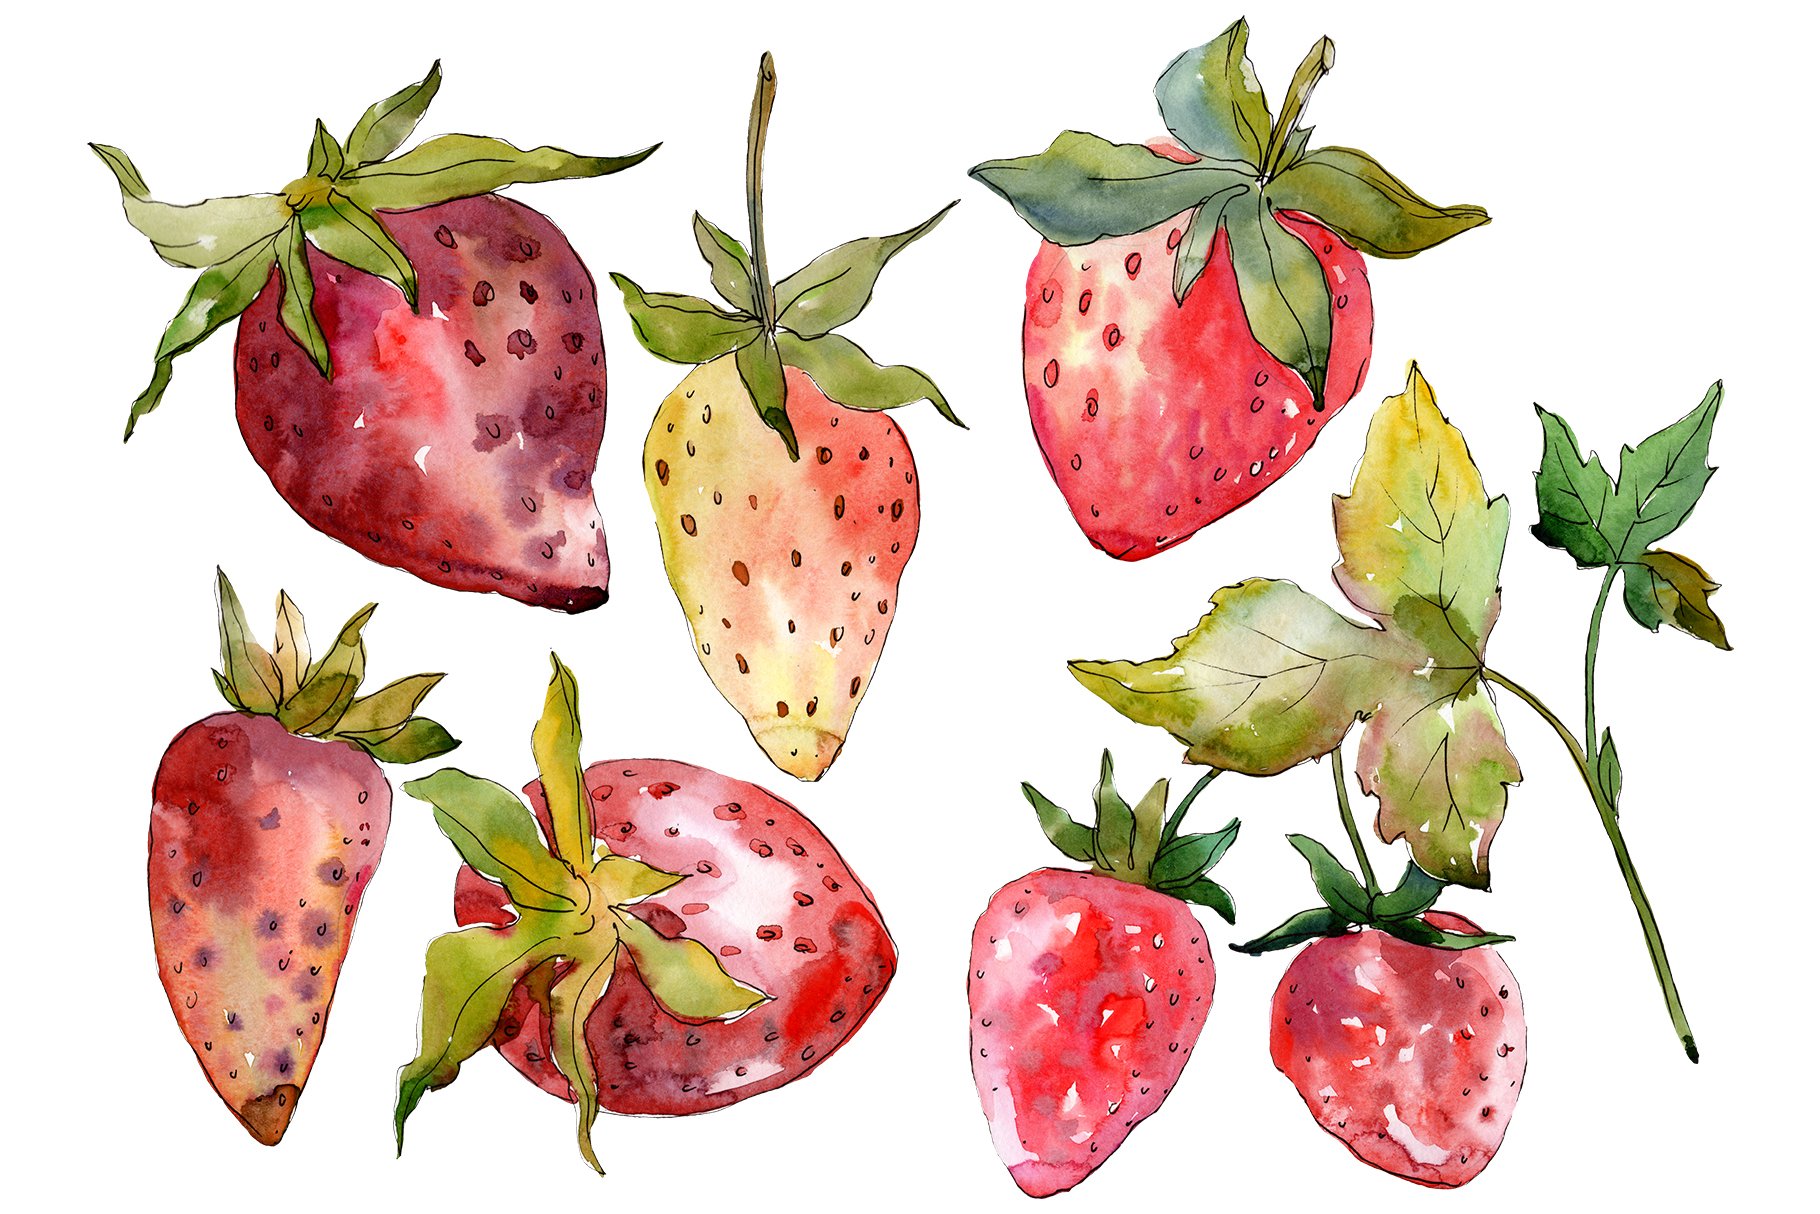 Diverse of strawberries in the different conditions.